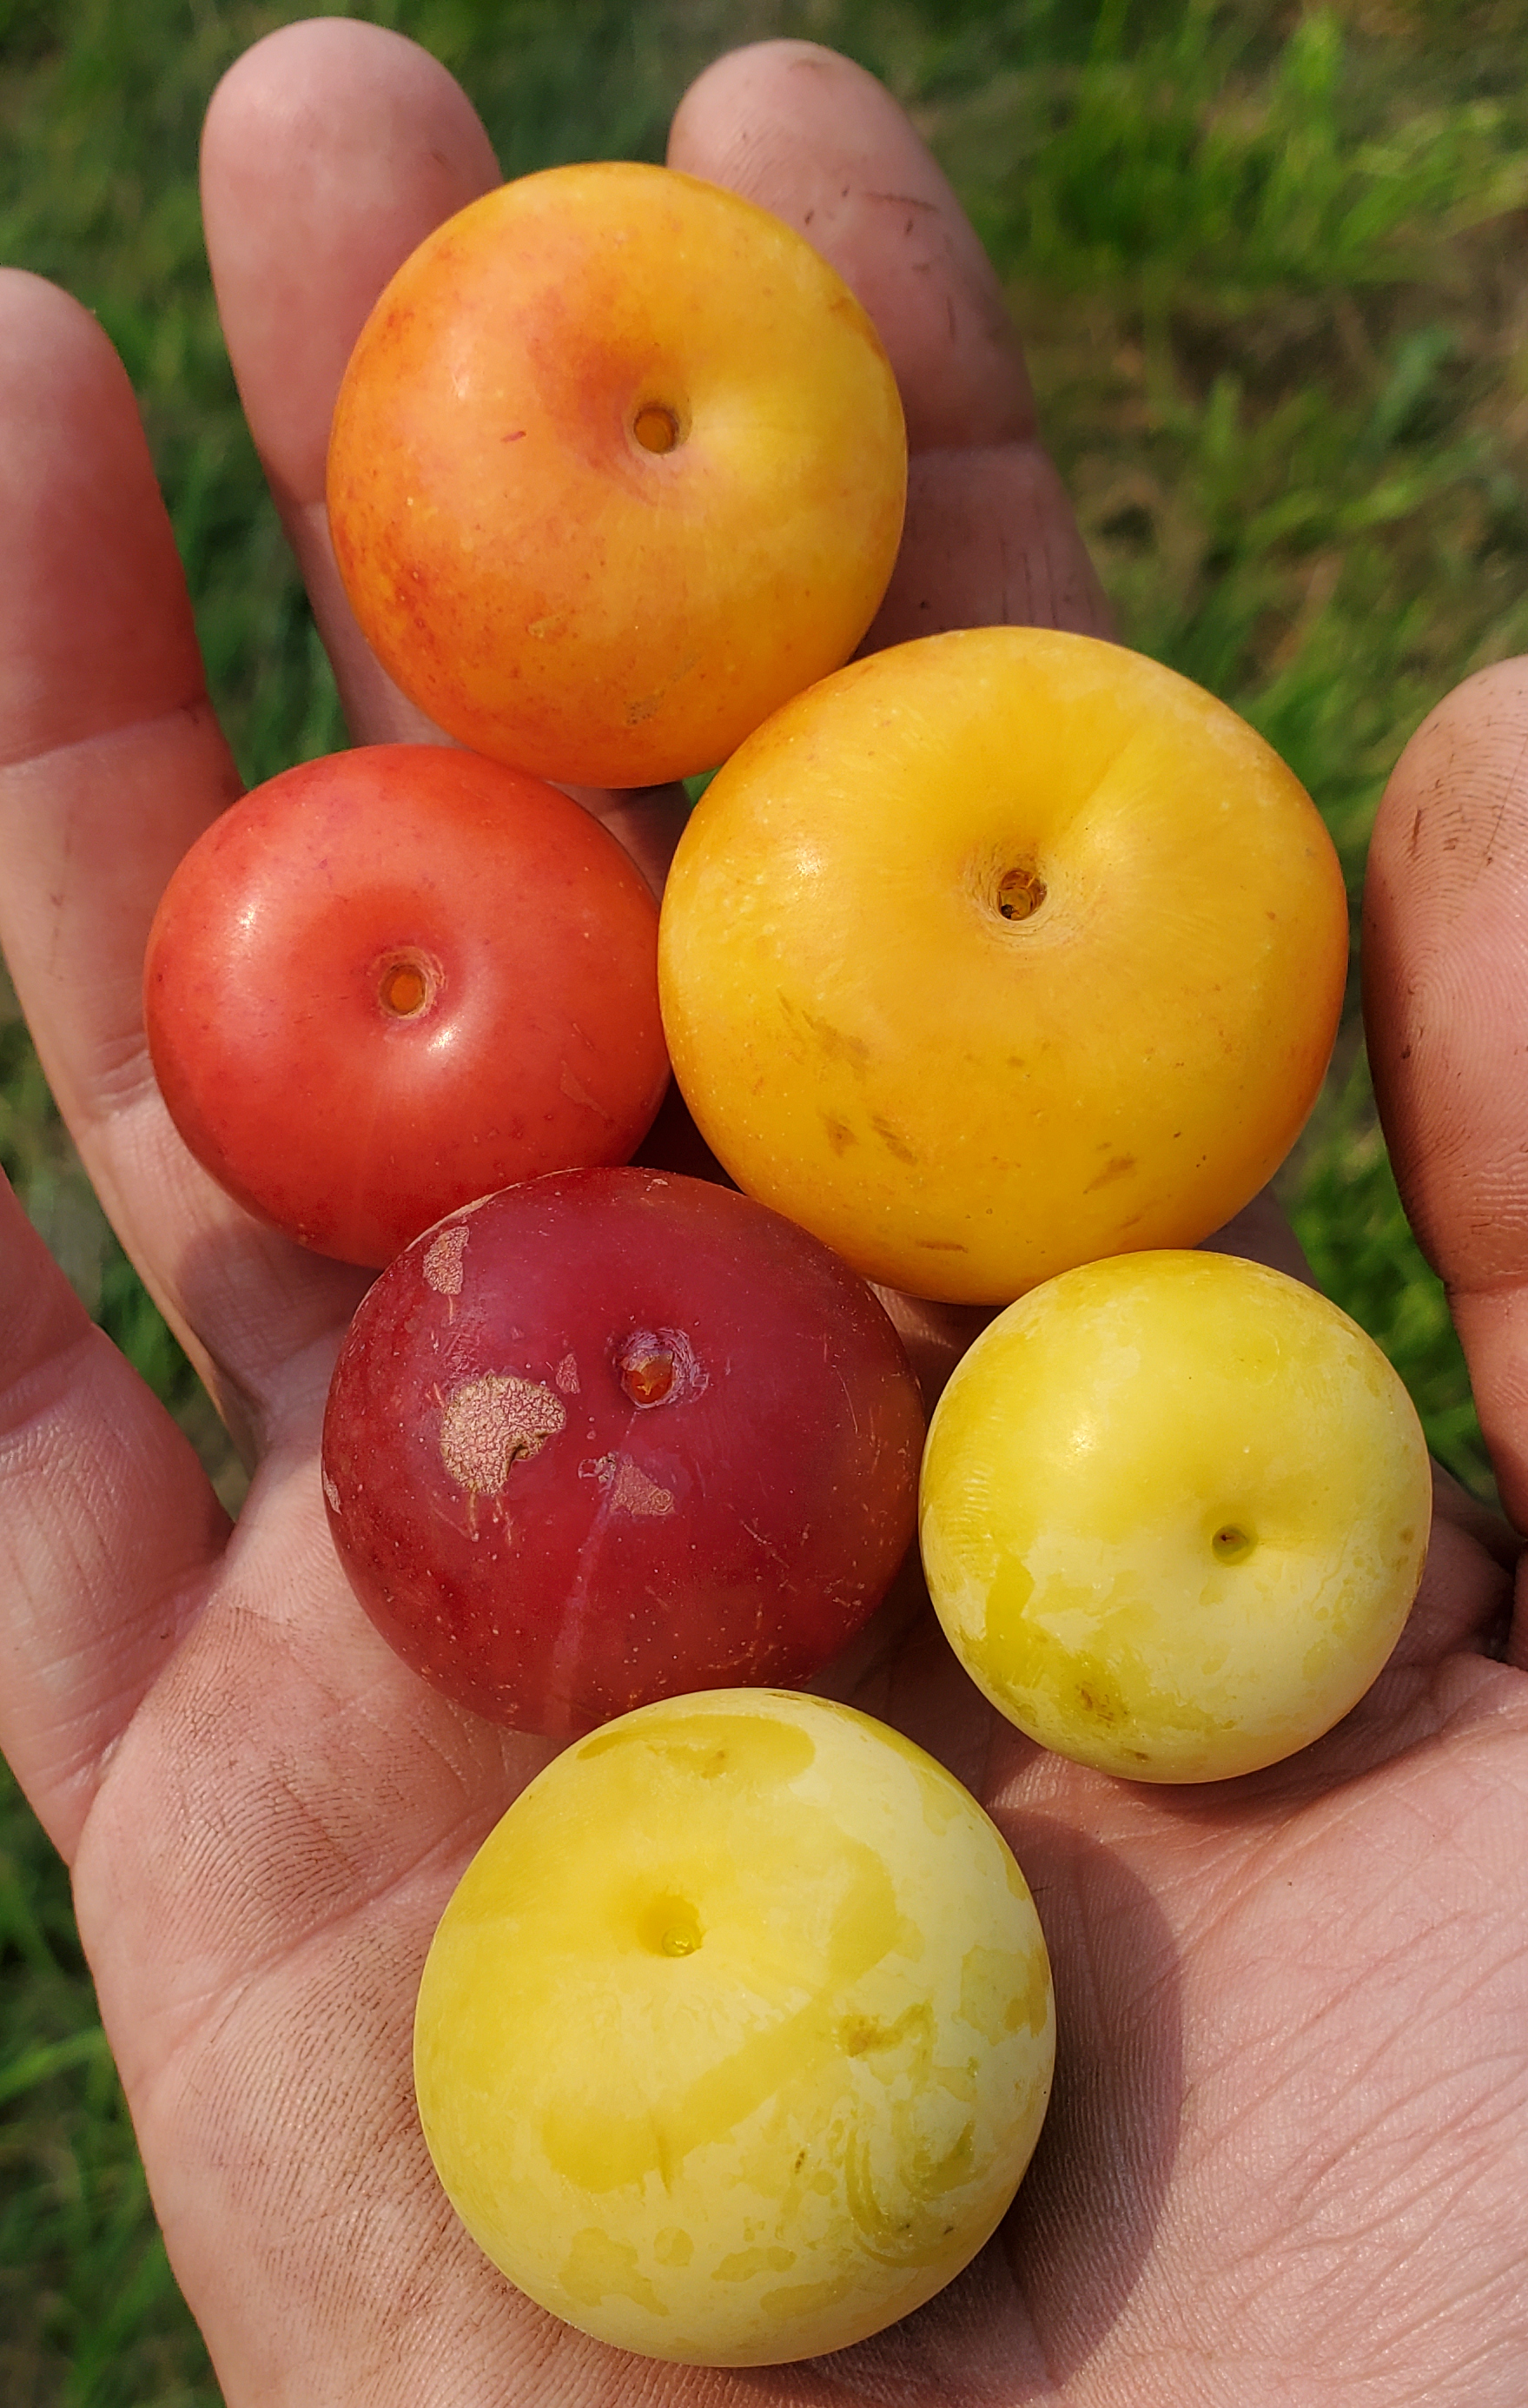 Several different kinds of plums.